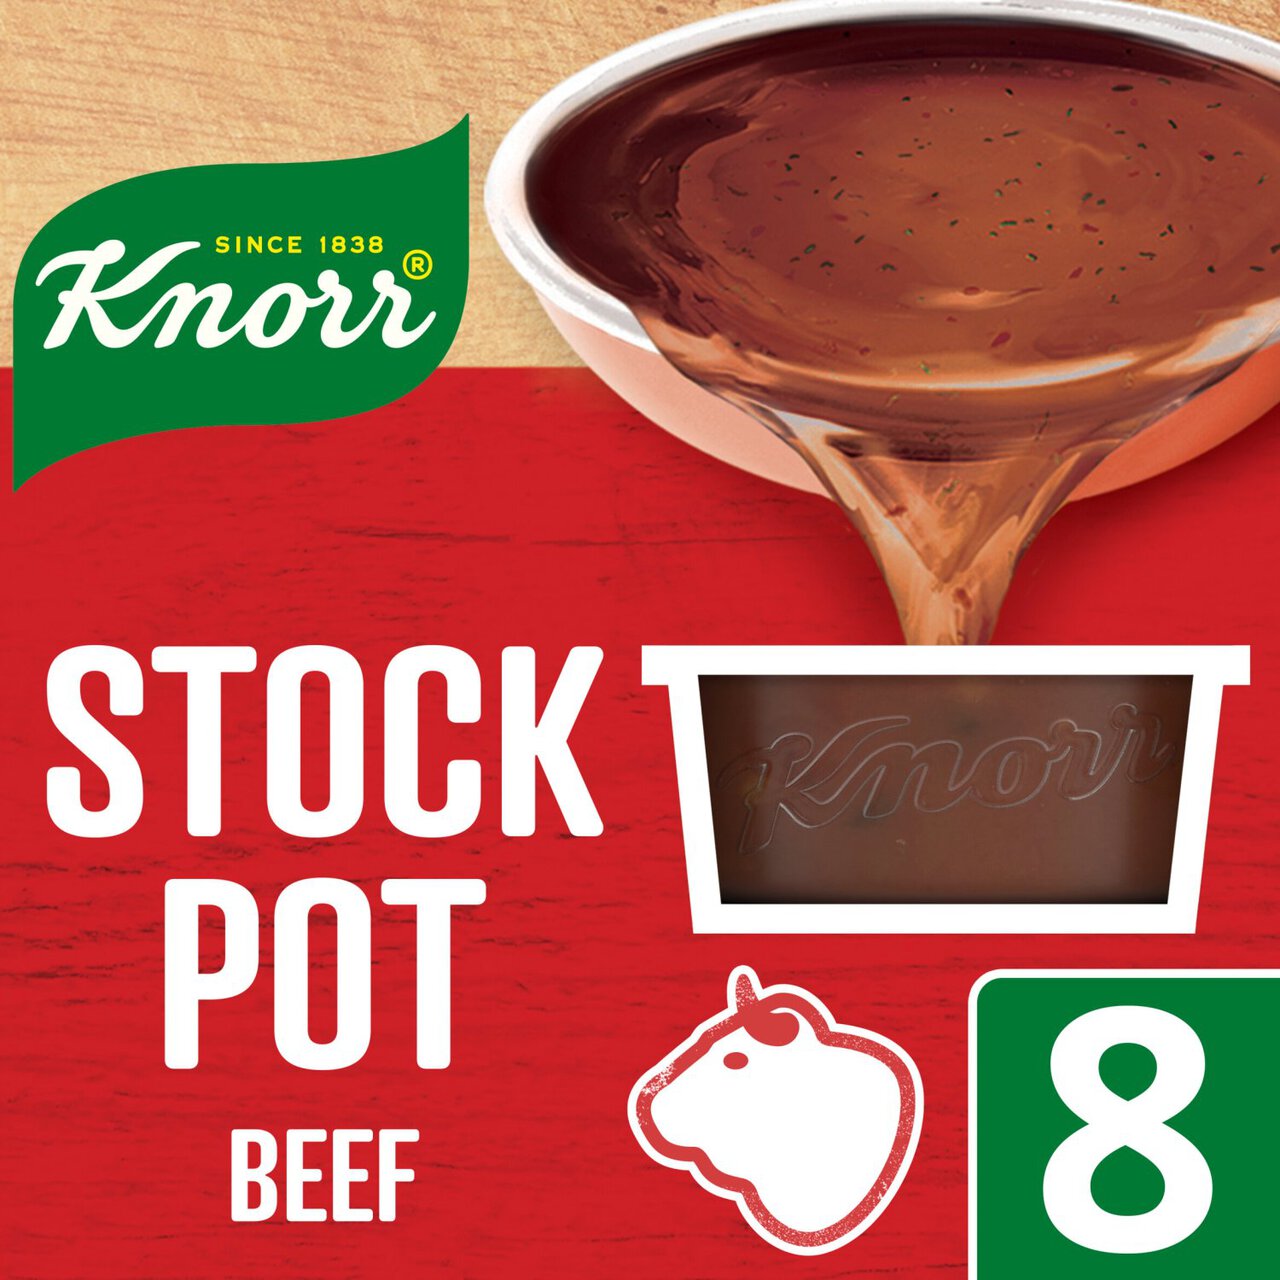 Knorr 8 Beef Stock Pot 8 x 28g